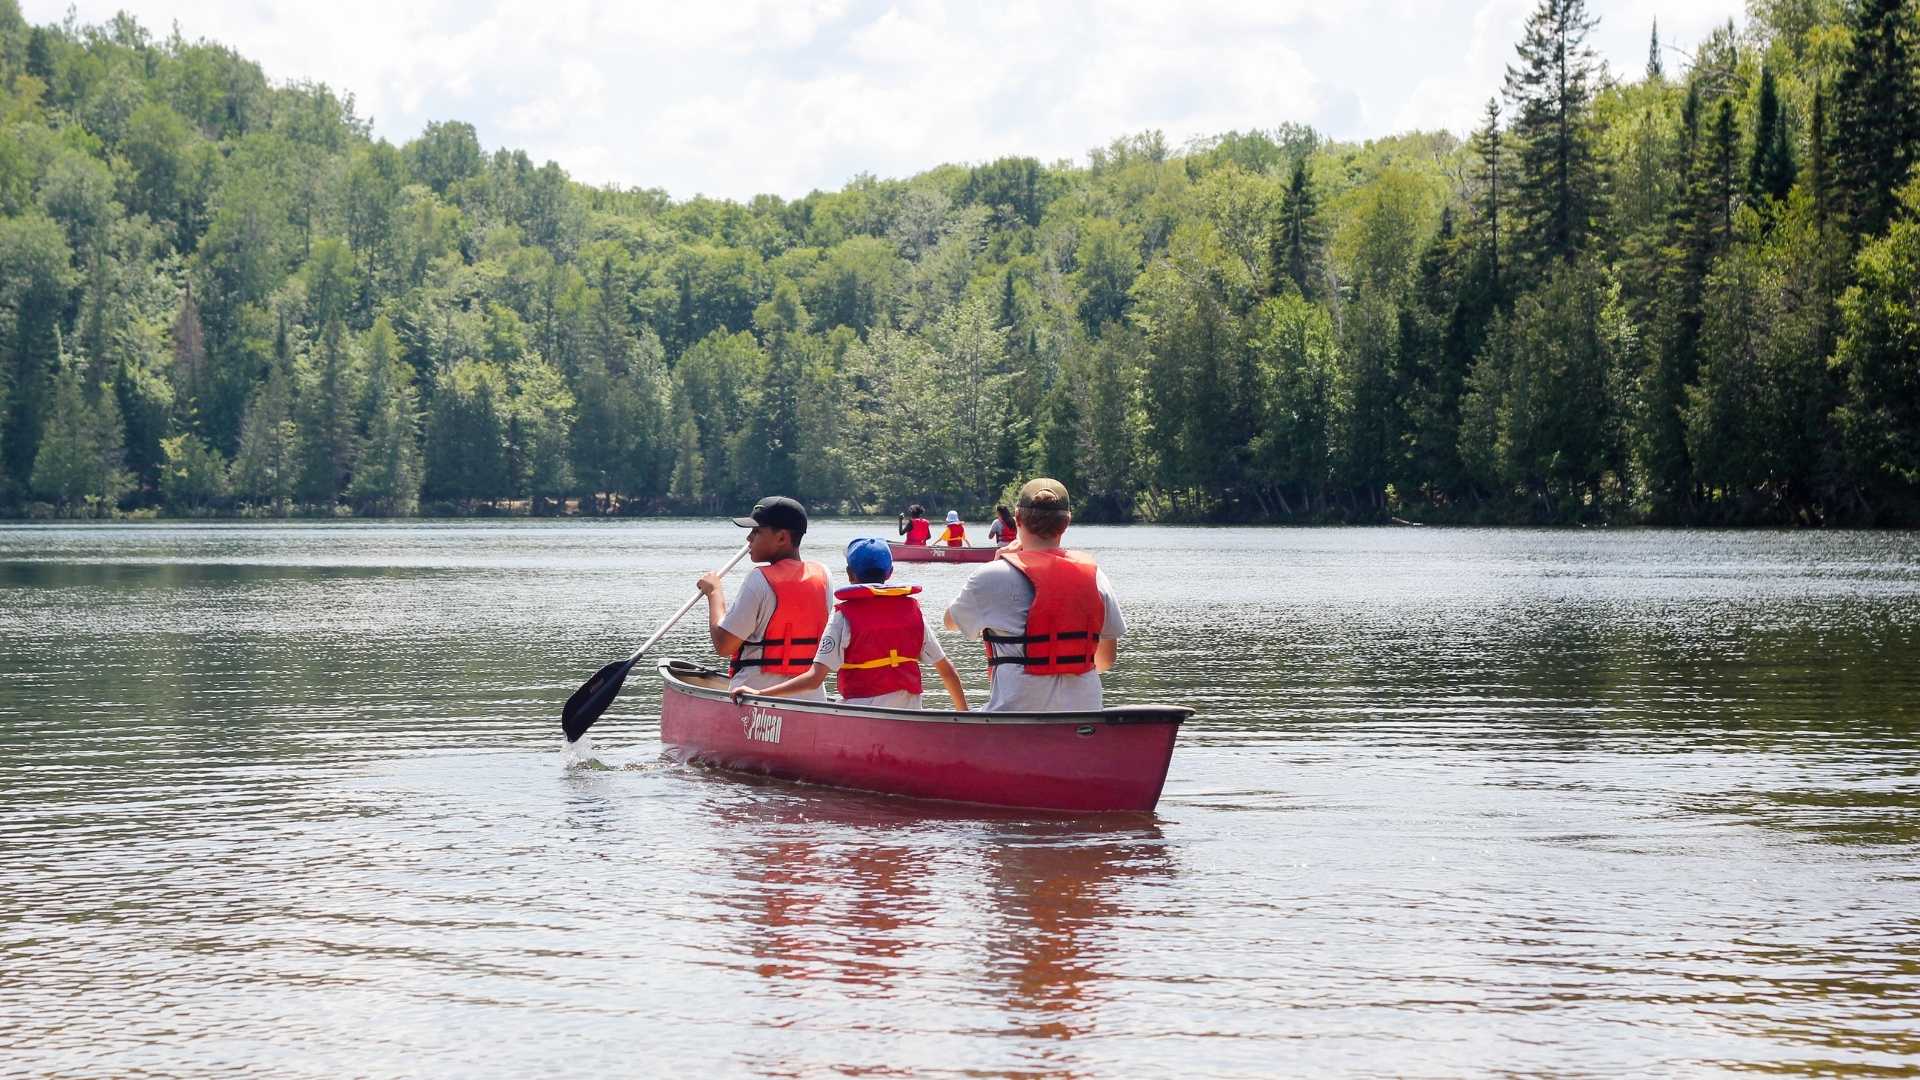 A group of people riding a boat while doing some water exploration in a lake that is surrounded by beautiful trees